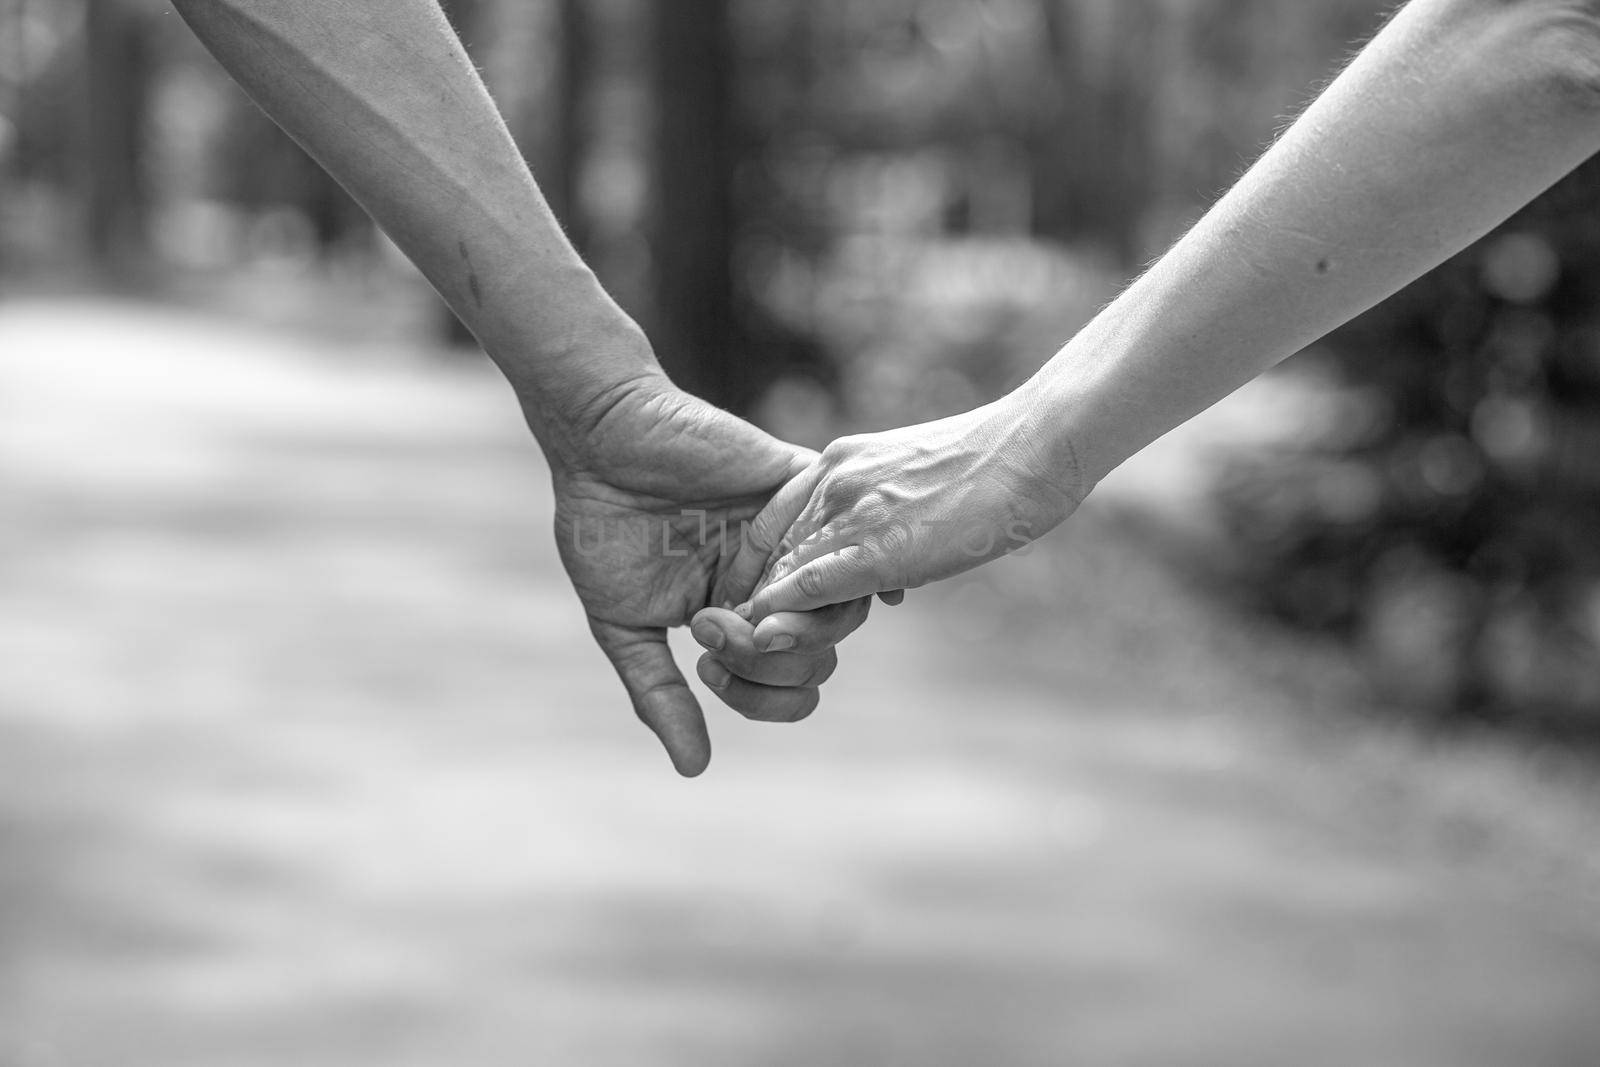 The husband's hand firmly holds the wife's hand close-up. Loving couple walking and holding hands. Reliable and strong marriage. The concept of romance, fidelity in marriage and love. Black and white